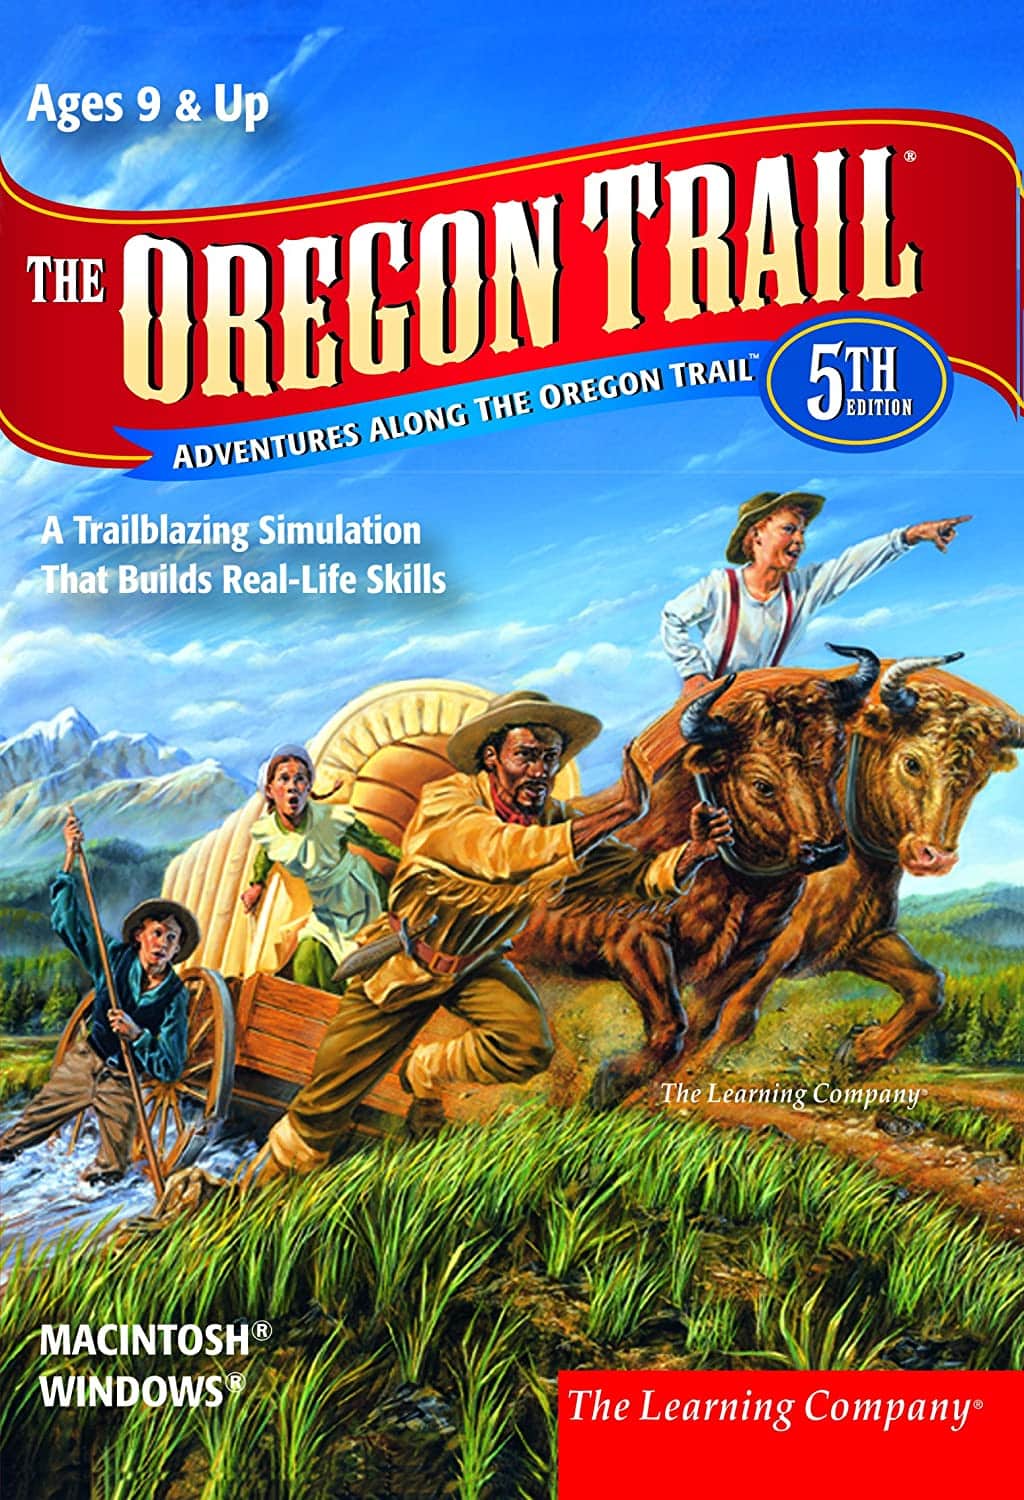 Oregon Trail player count stats